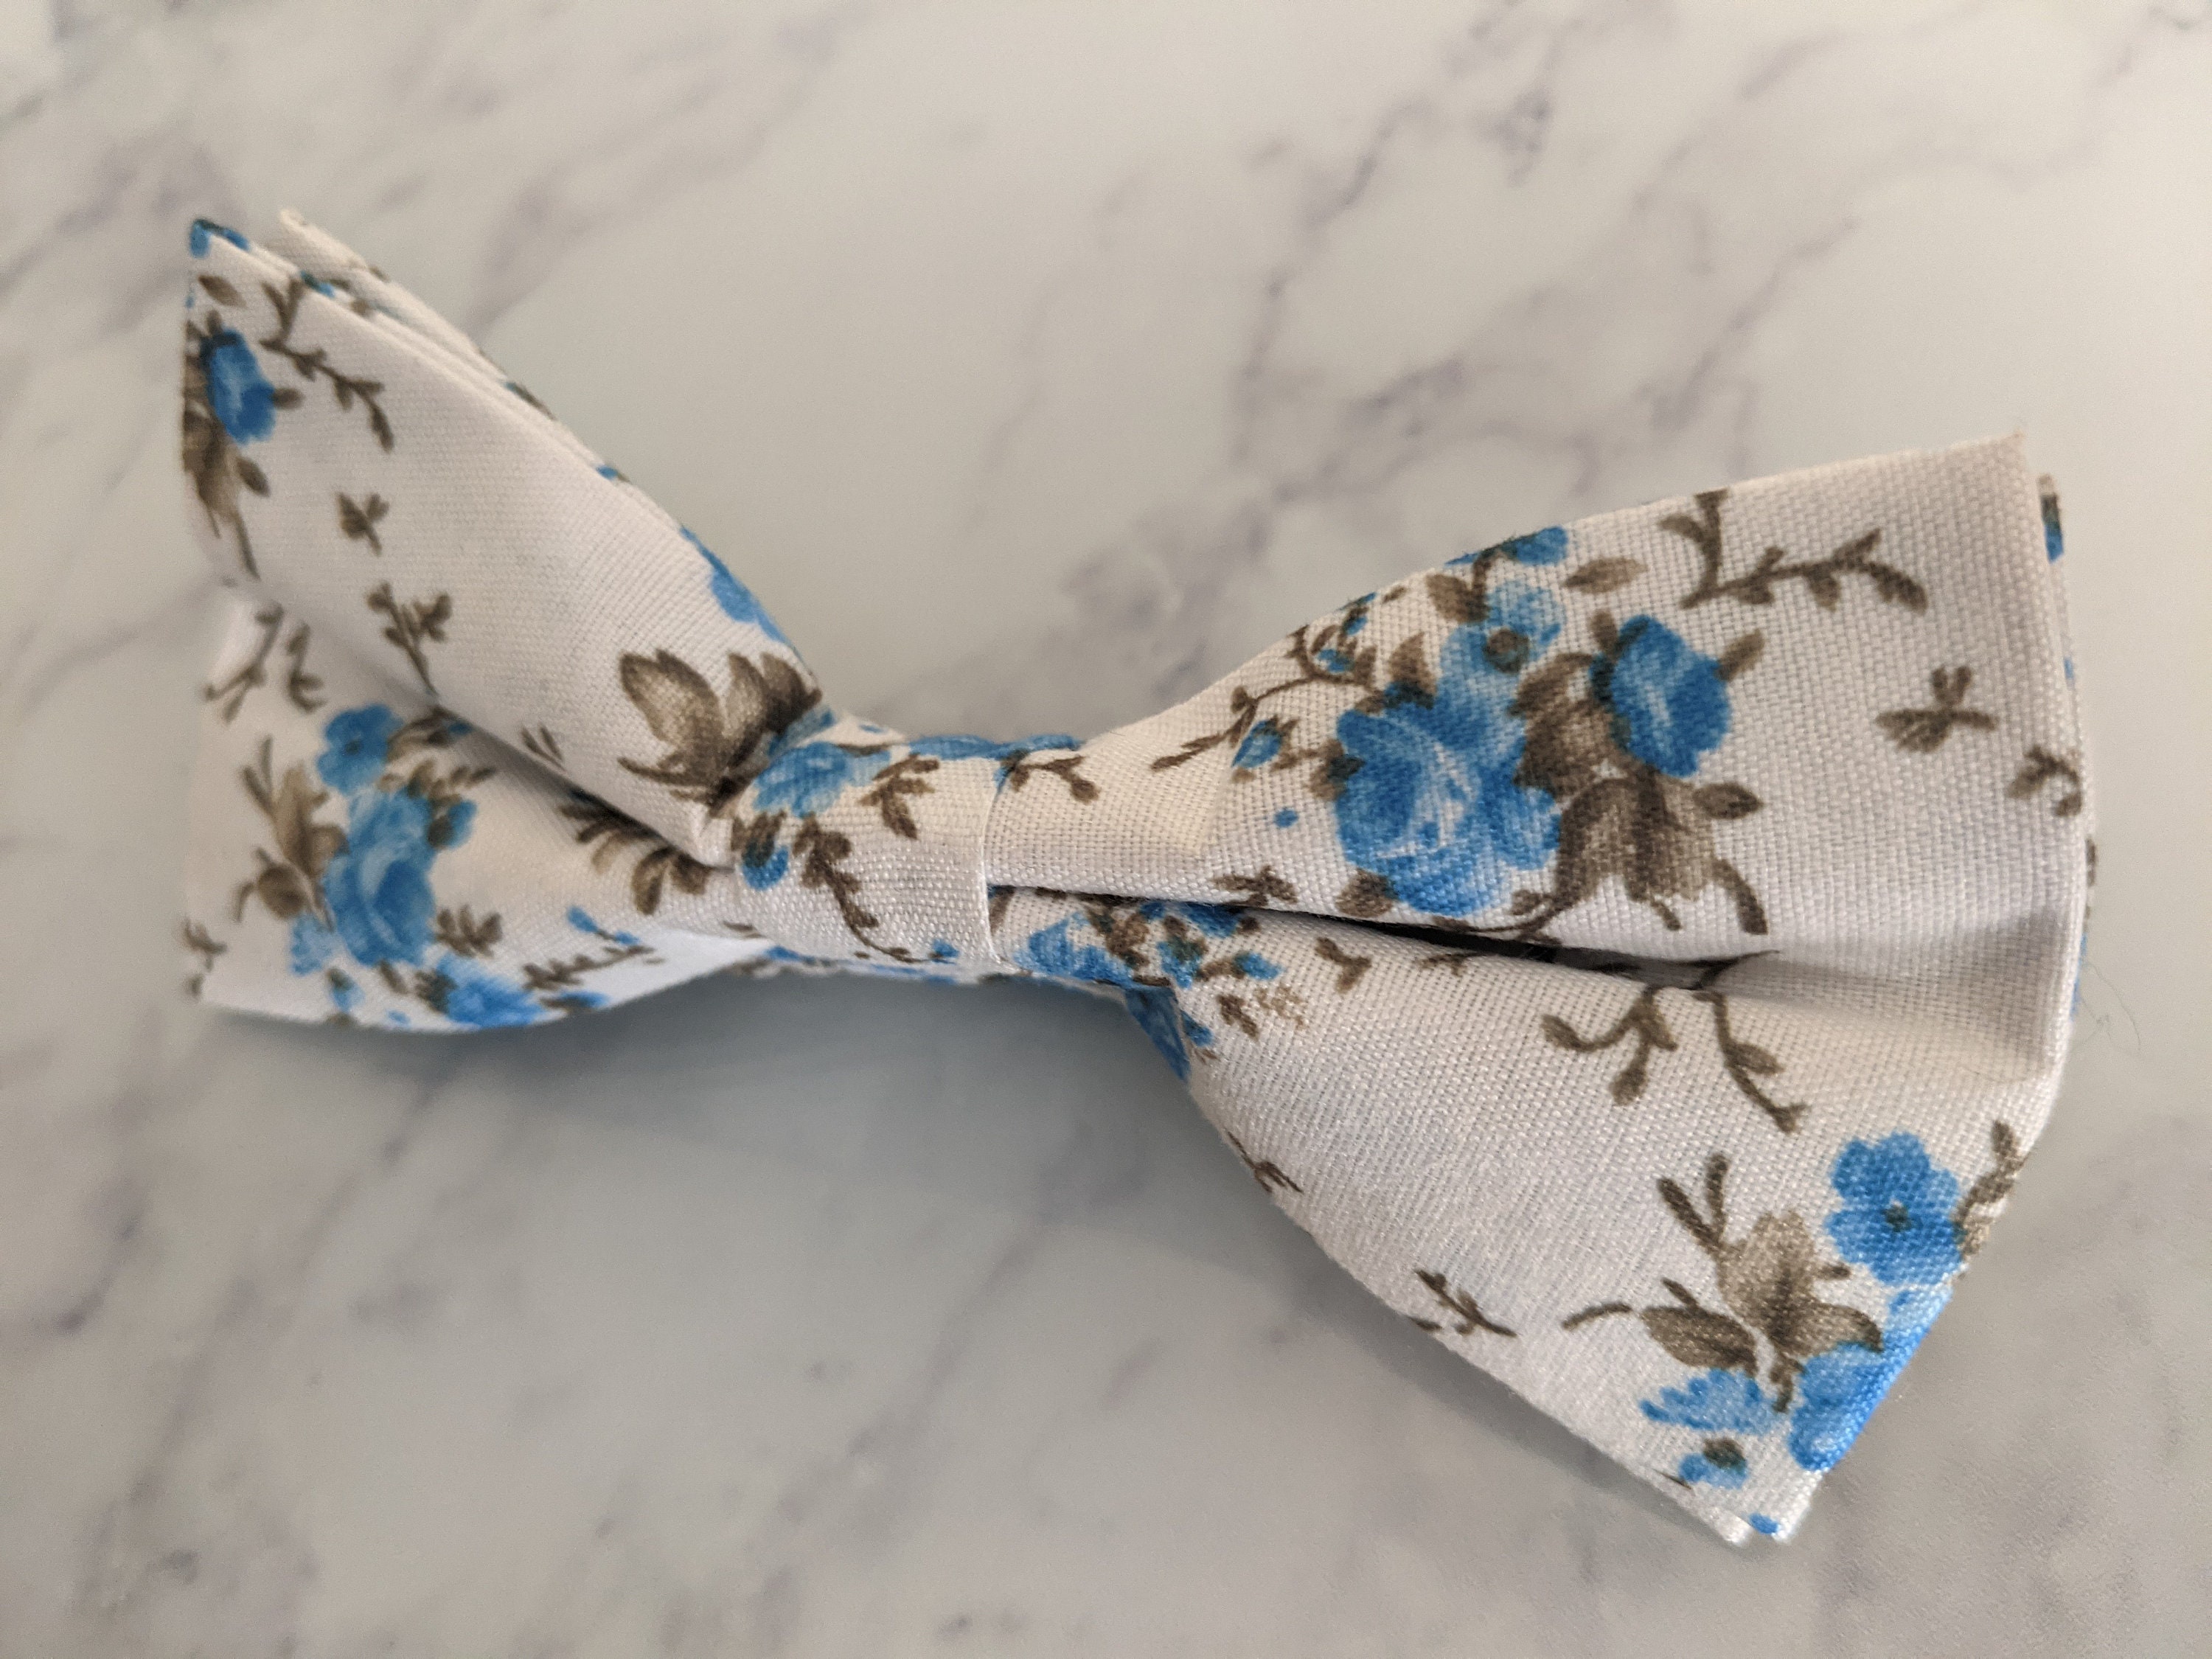 White with Floral Premium Quality Cotton Bow Tie Pre-Tied BV150 